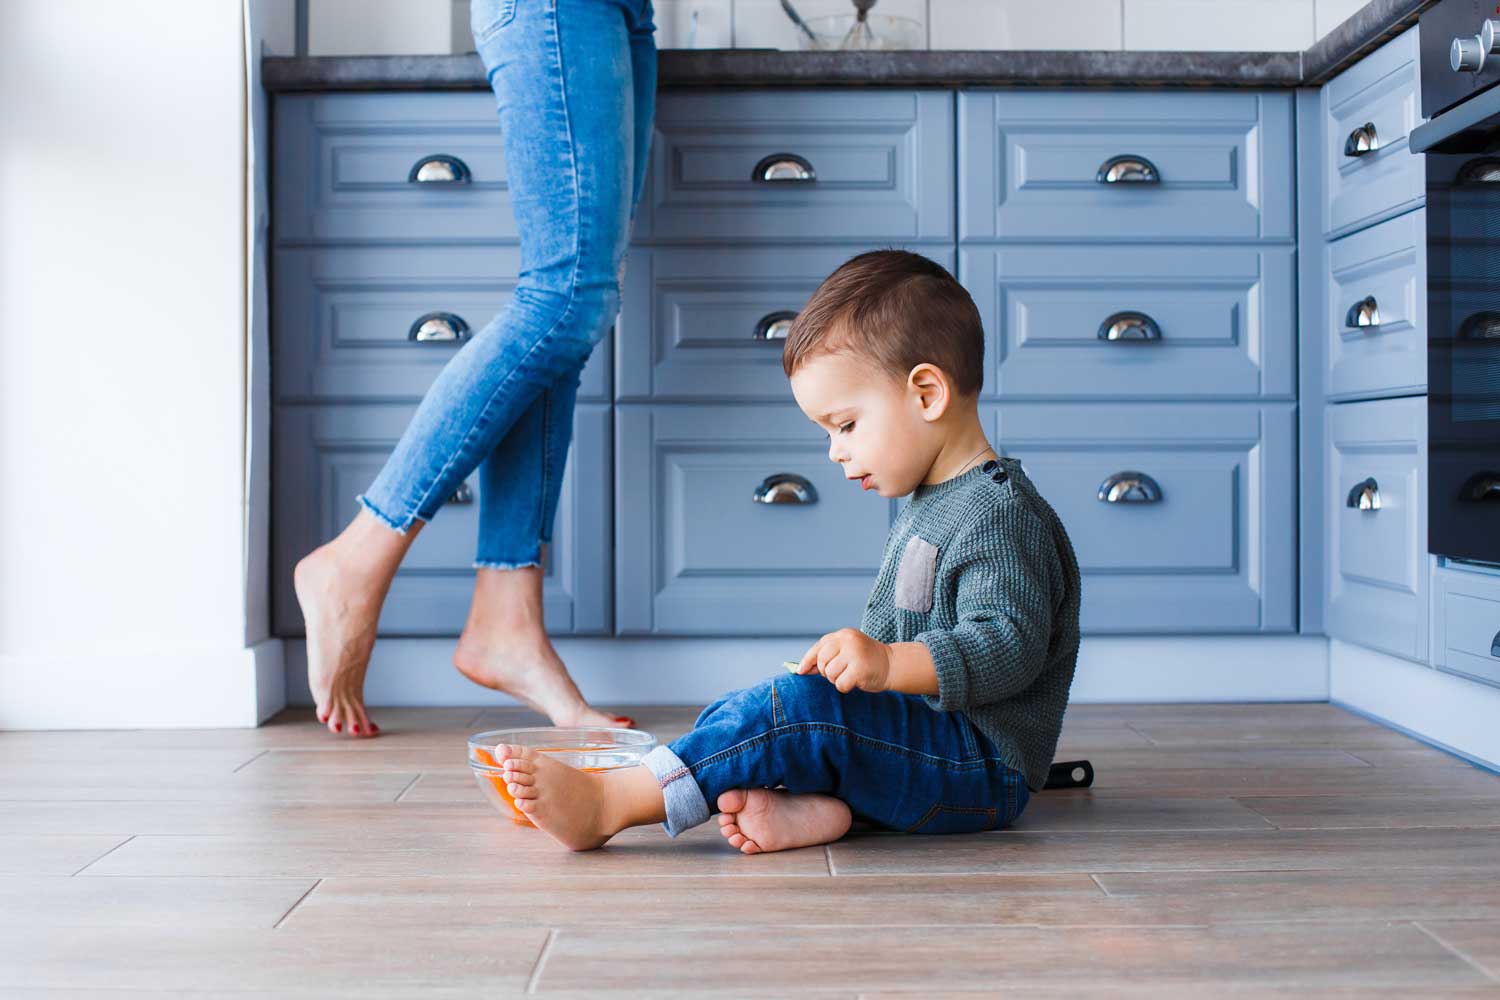 This mom and child follow Footprints Floors's advice to keep shoes off of hardwood flooring.